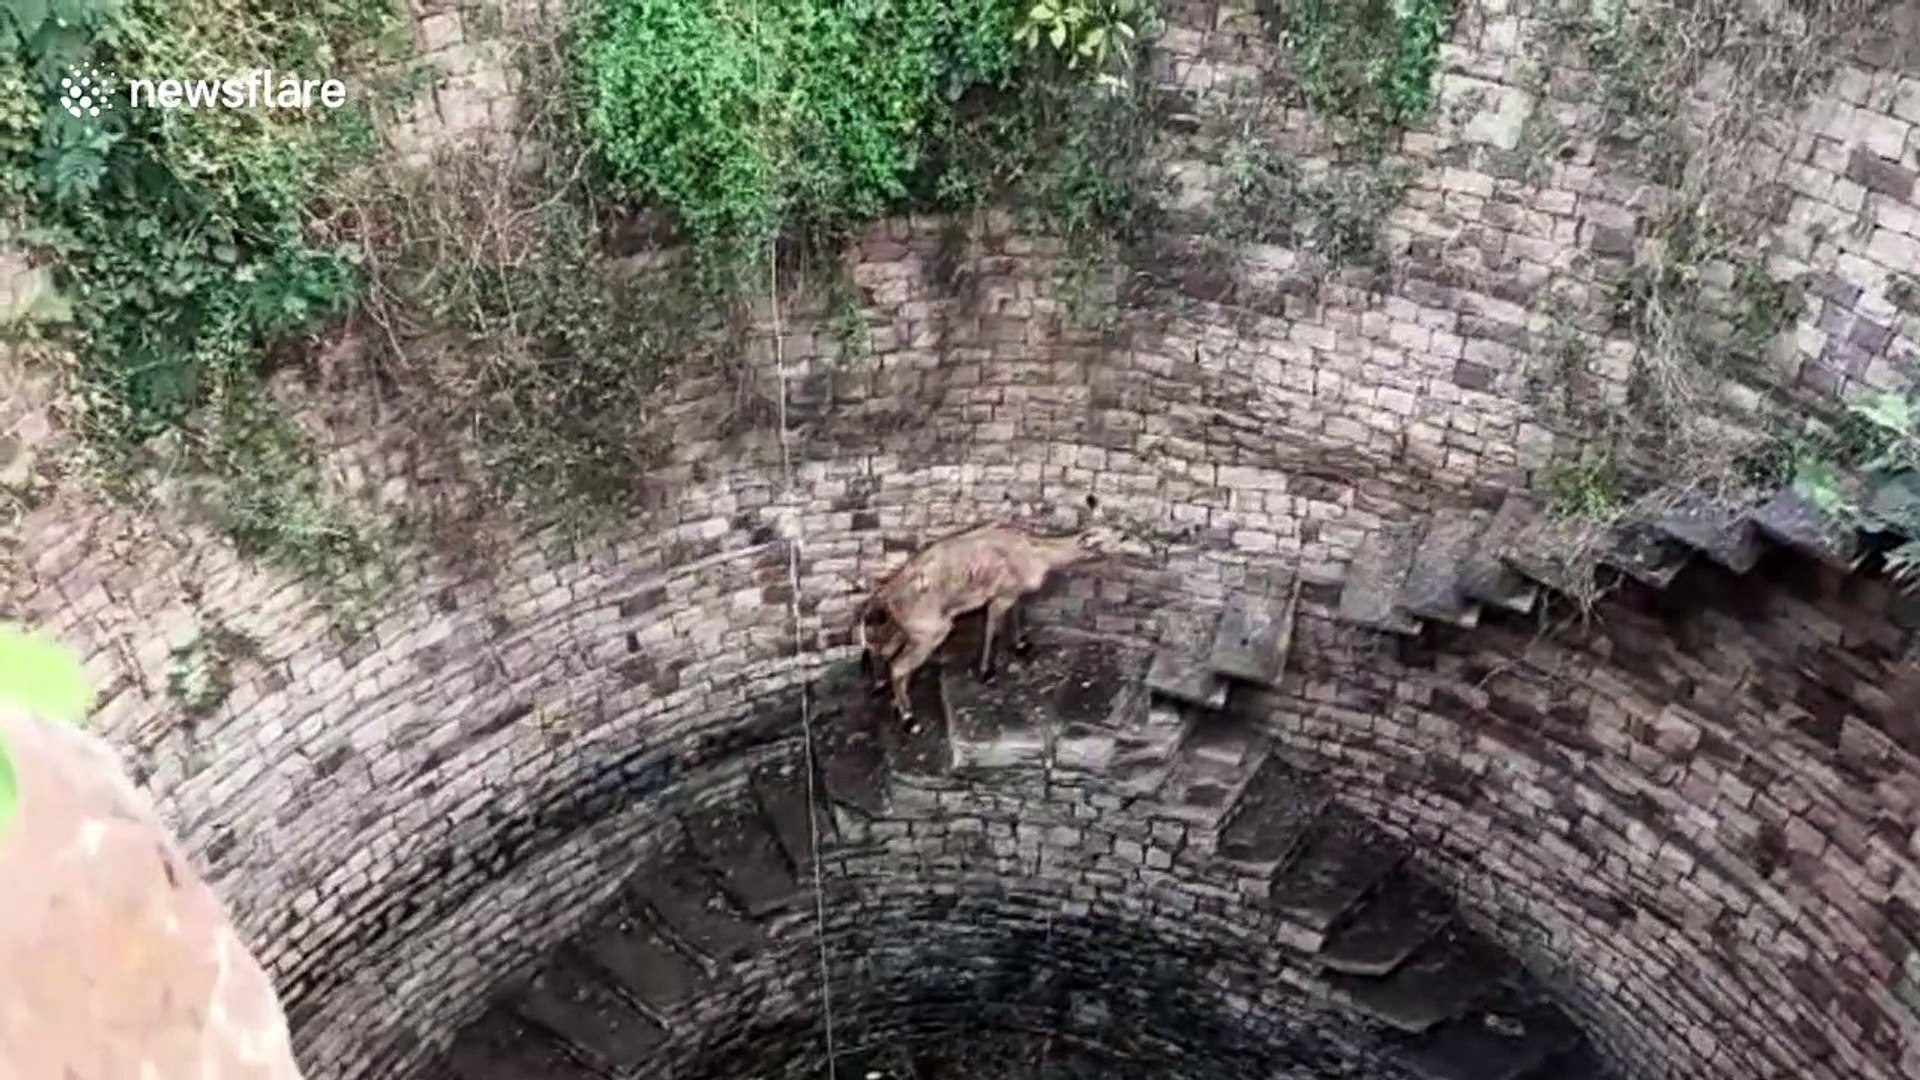 Forest department officials haul out antelope from 60-foot step-well in central India